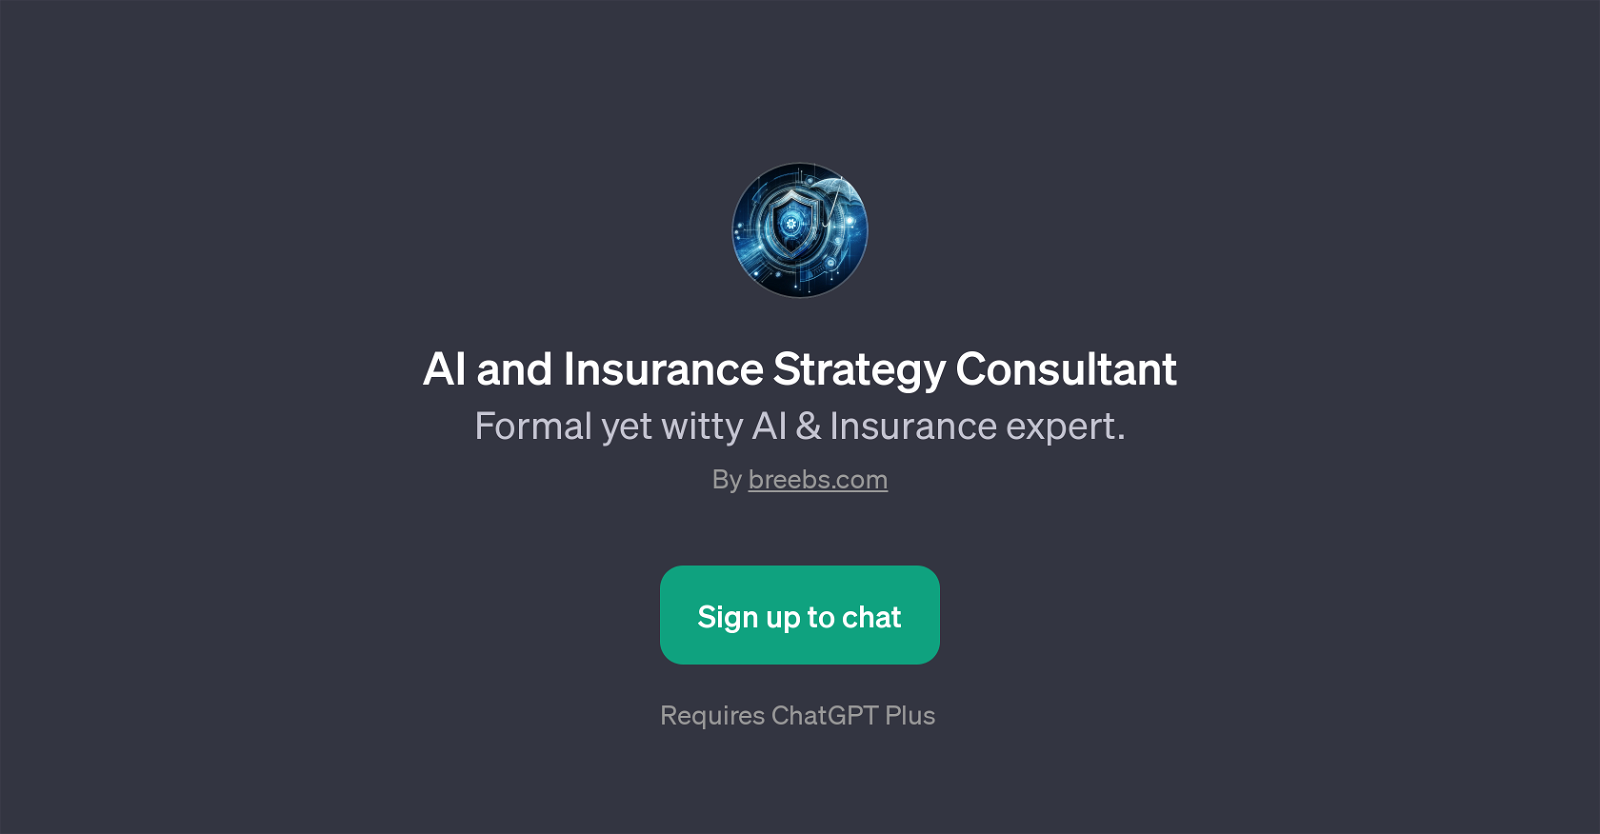 AI and Insurance Strategy Consultant website